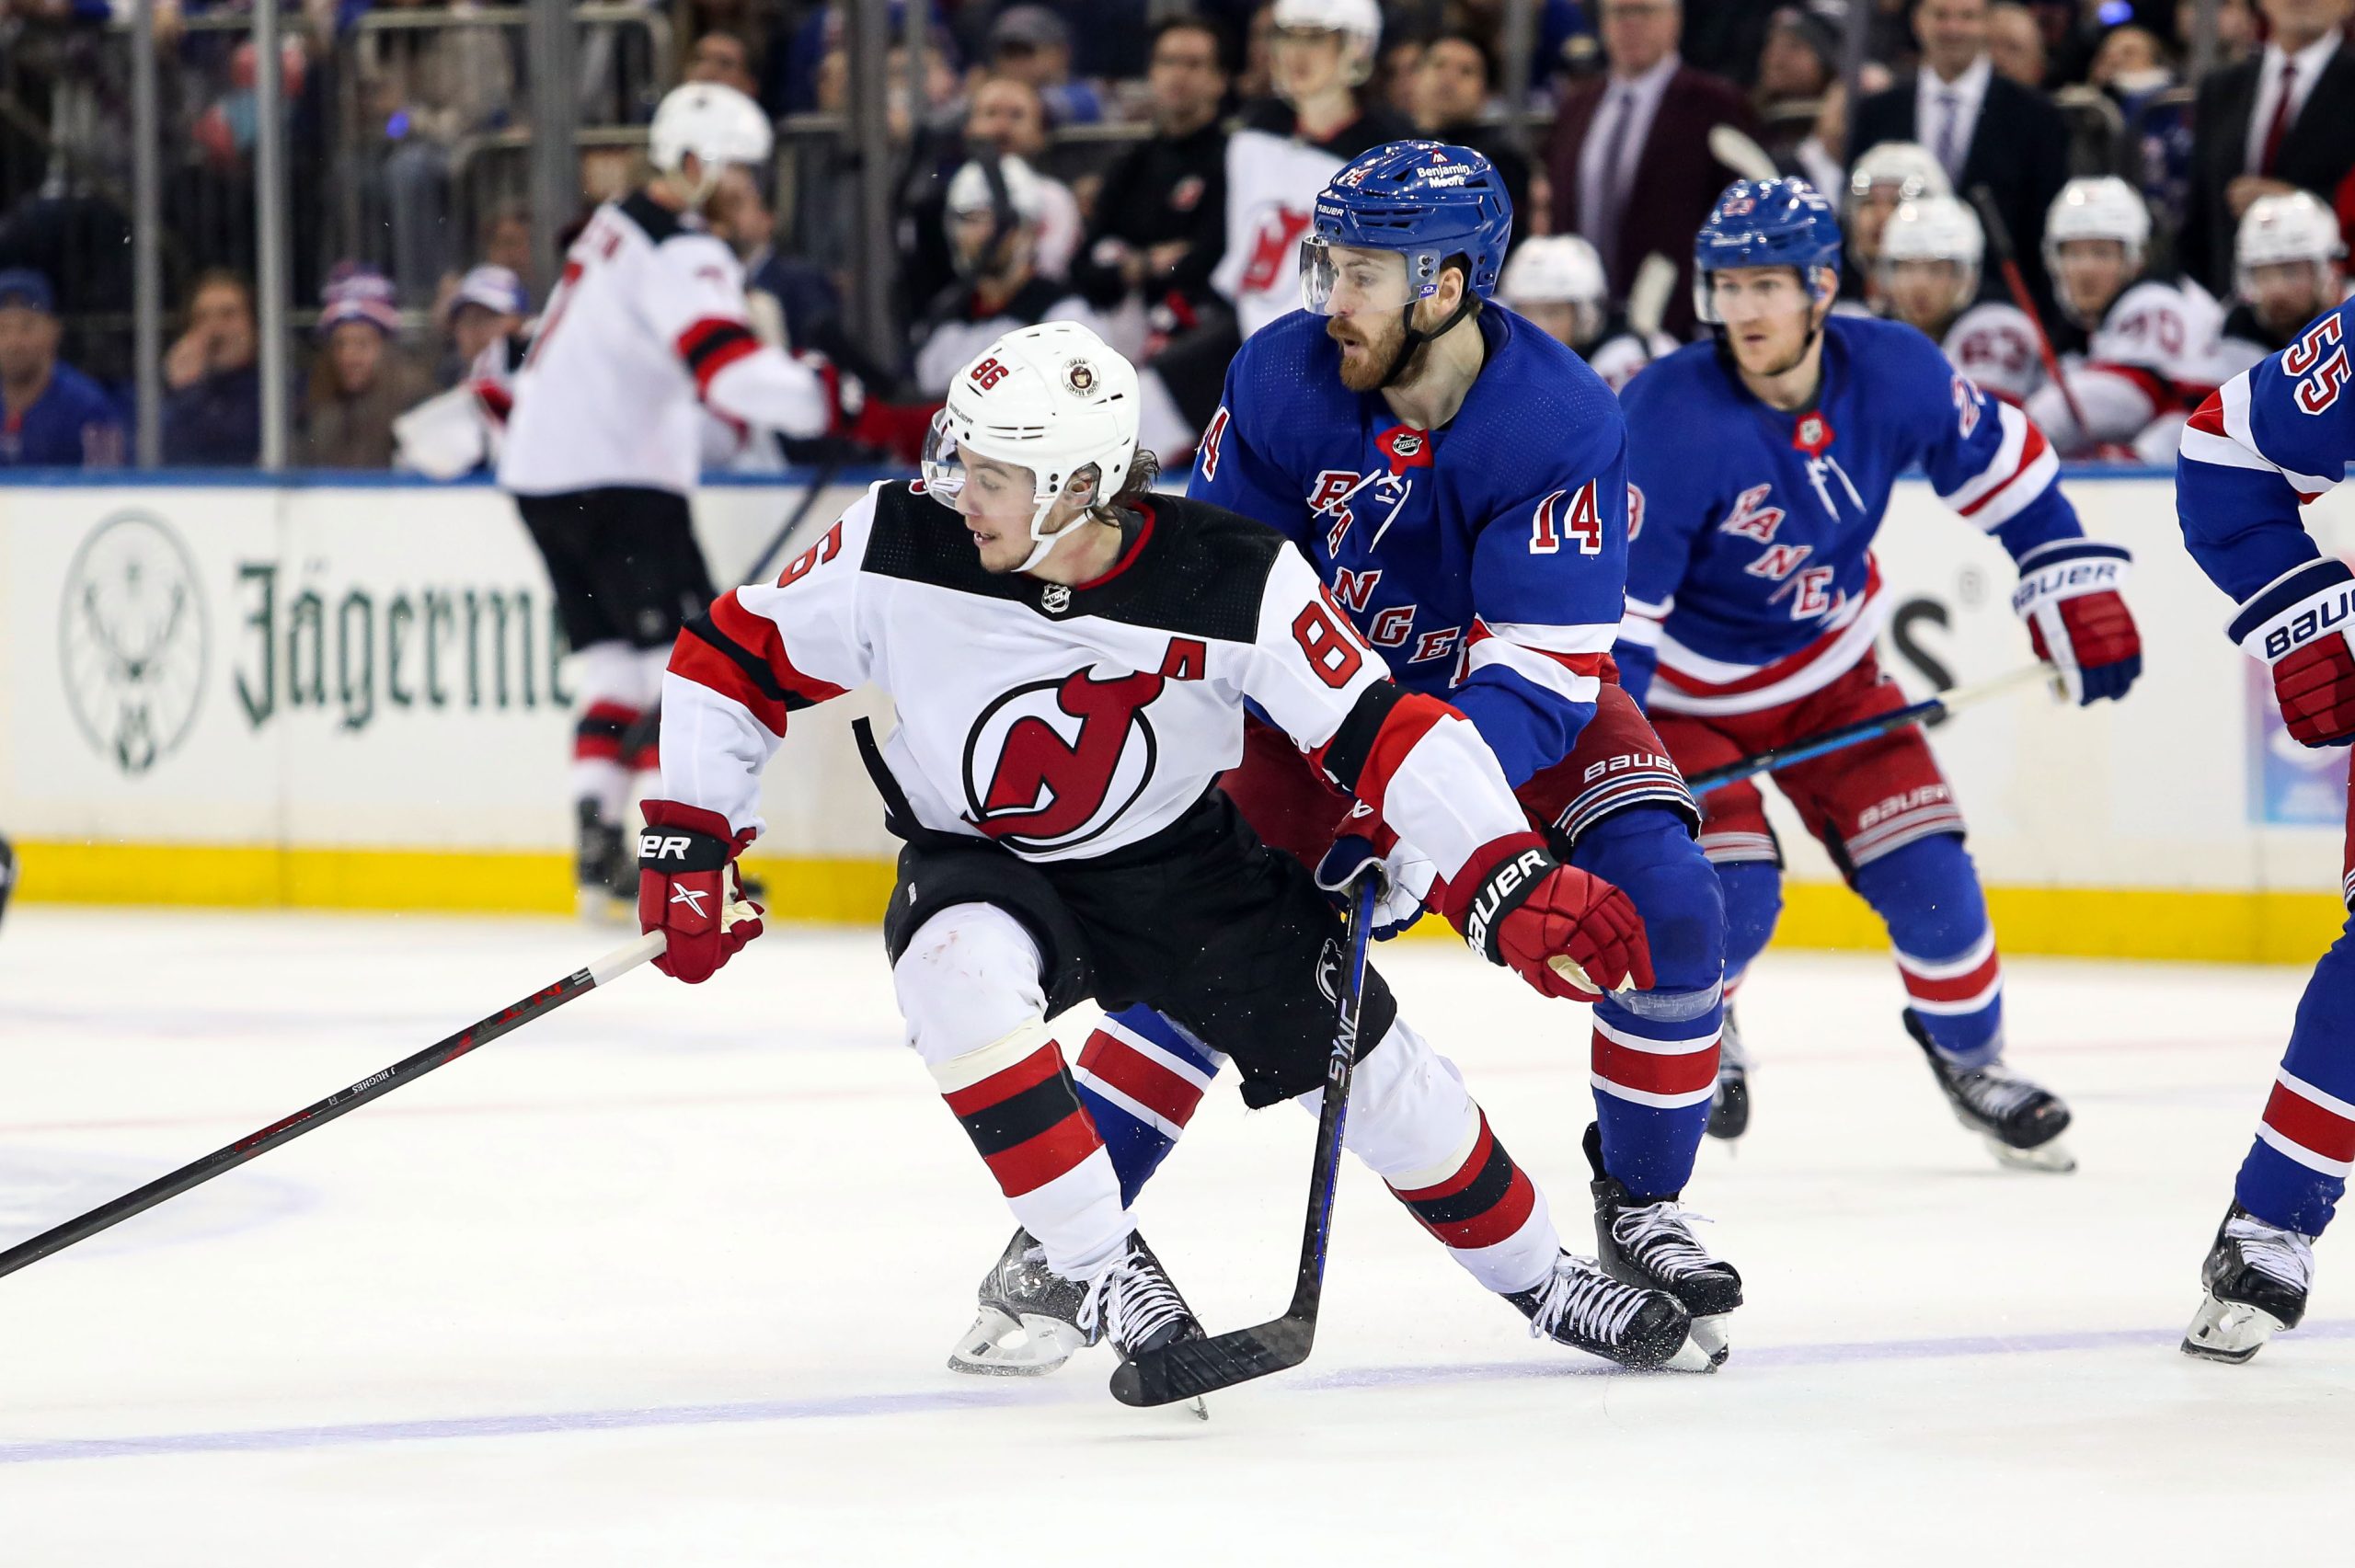 Is Akira Schmid playing tonight against New York Rangers? May 1